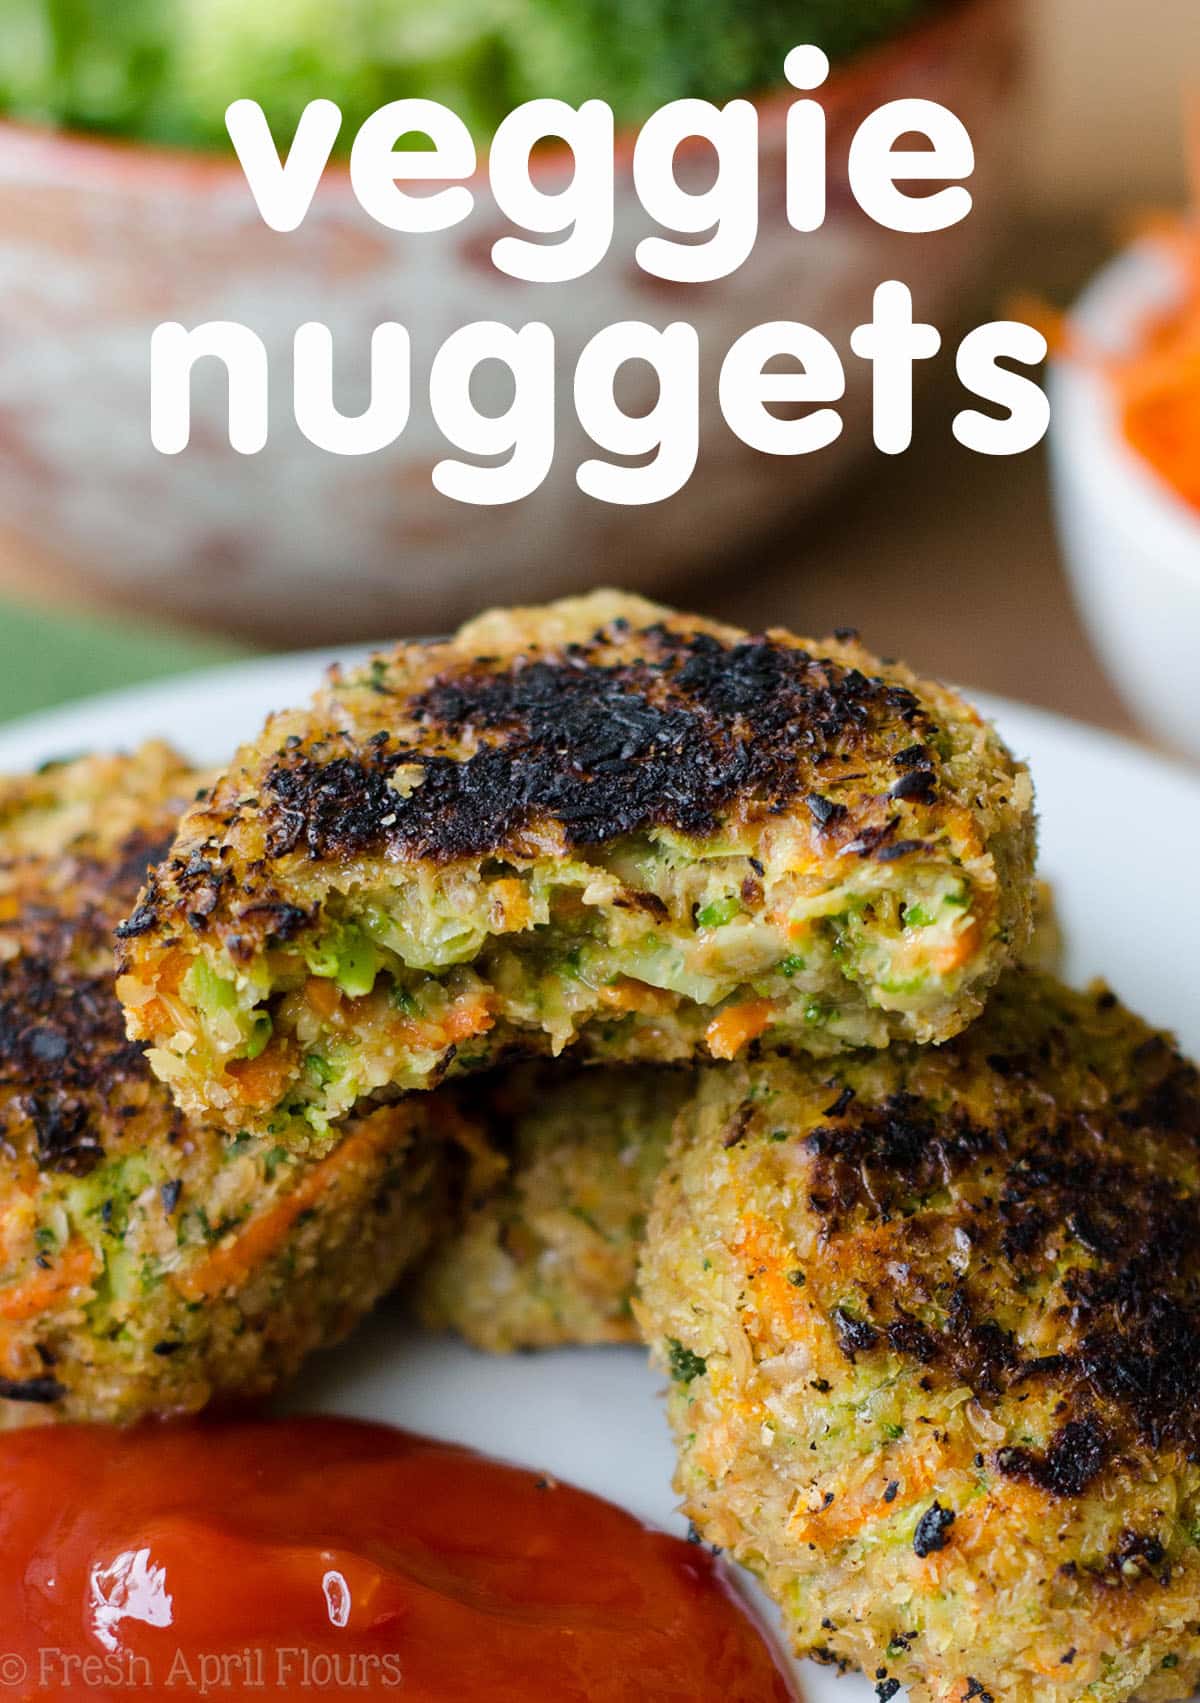 Veggie Nuggets: Gluten-free vegetable patties perfect for little hands and adults alike. via @frshaprilflours